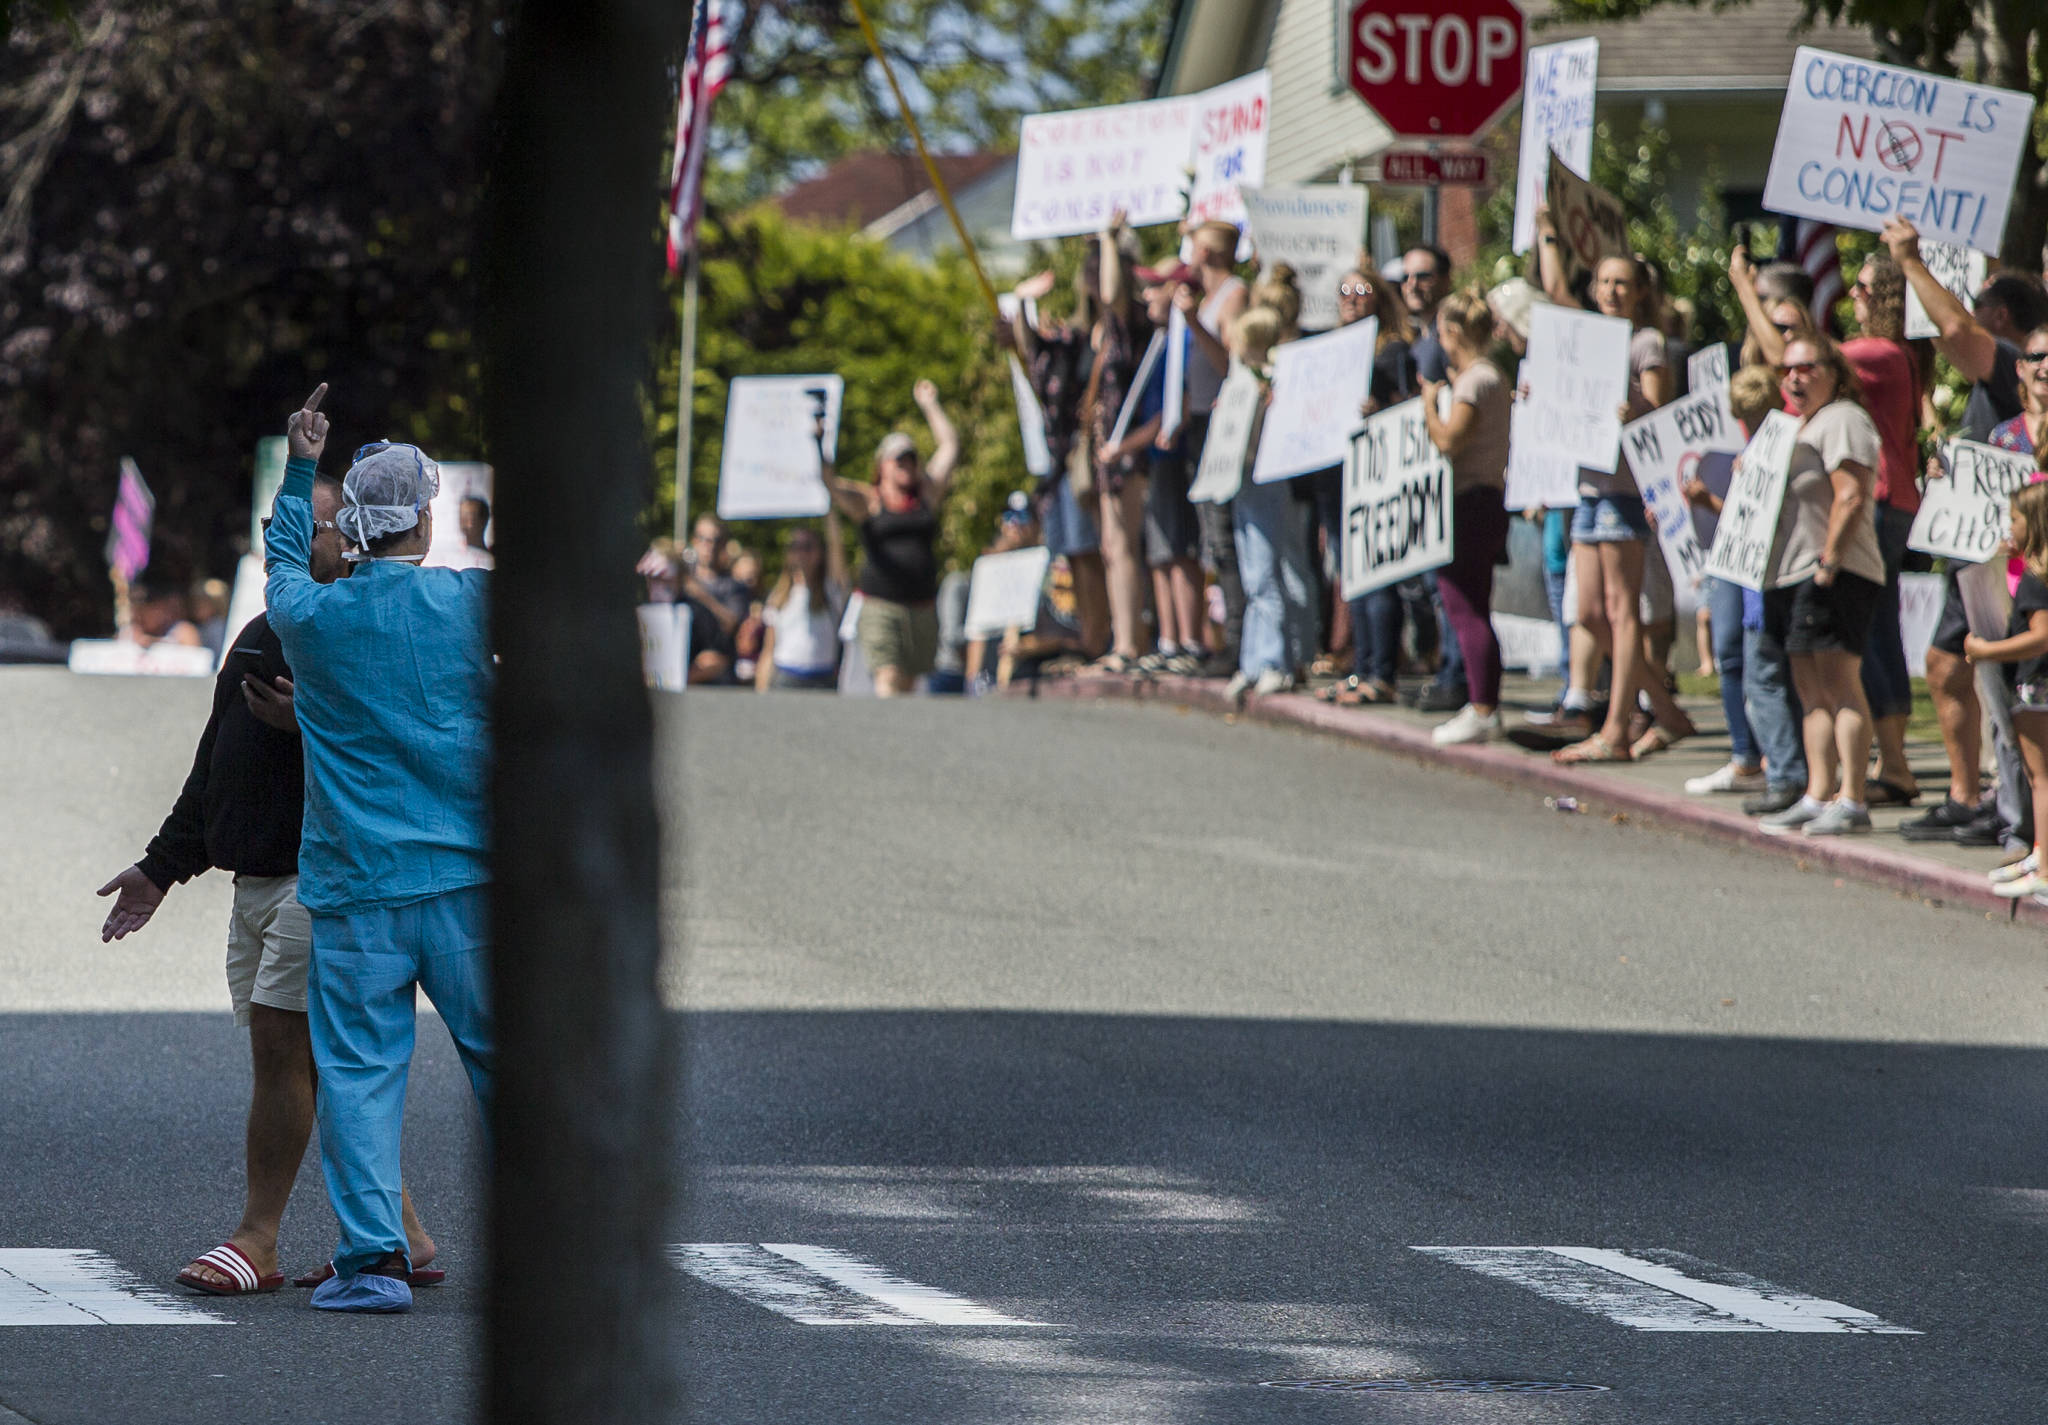 A Providence employee in scrubs reacts to a crowd of vaccine-mandate opponents outside Providence Regional Medical Center Everett on Wednesday. “Betrayed, hurt and sad,” is how he said he felt seeing people protesting outside the hospital. (Olivia Vanni / The Herald)